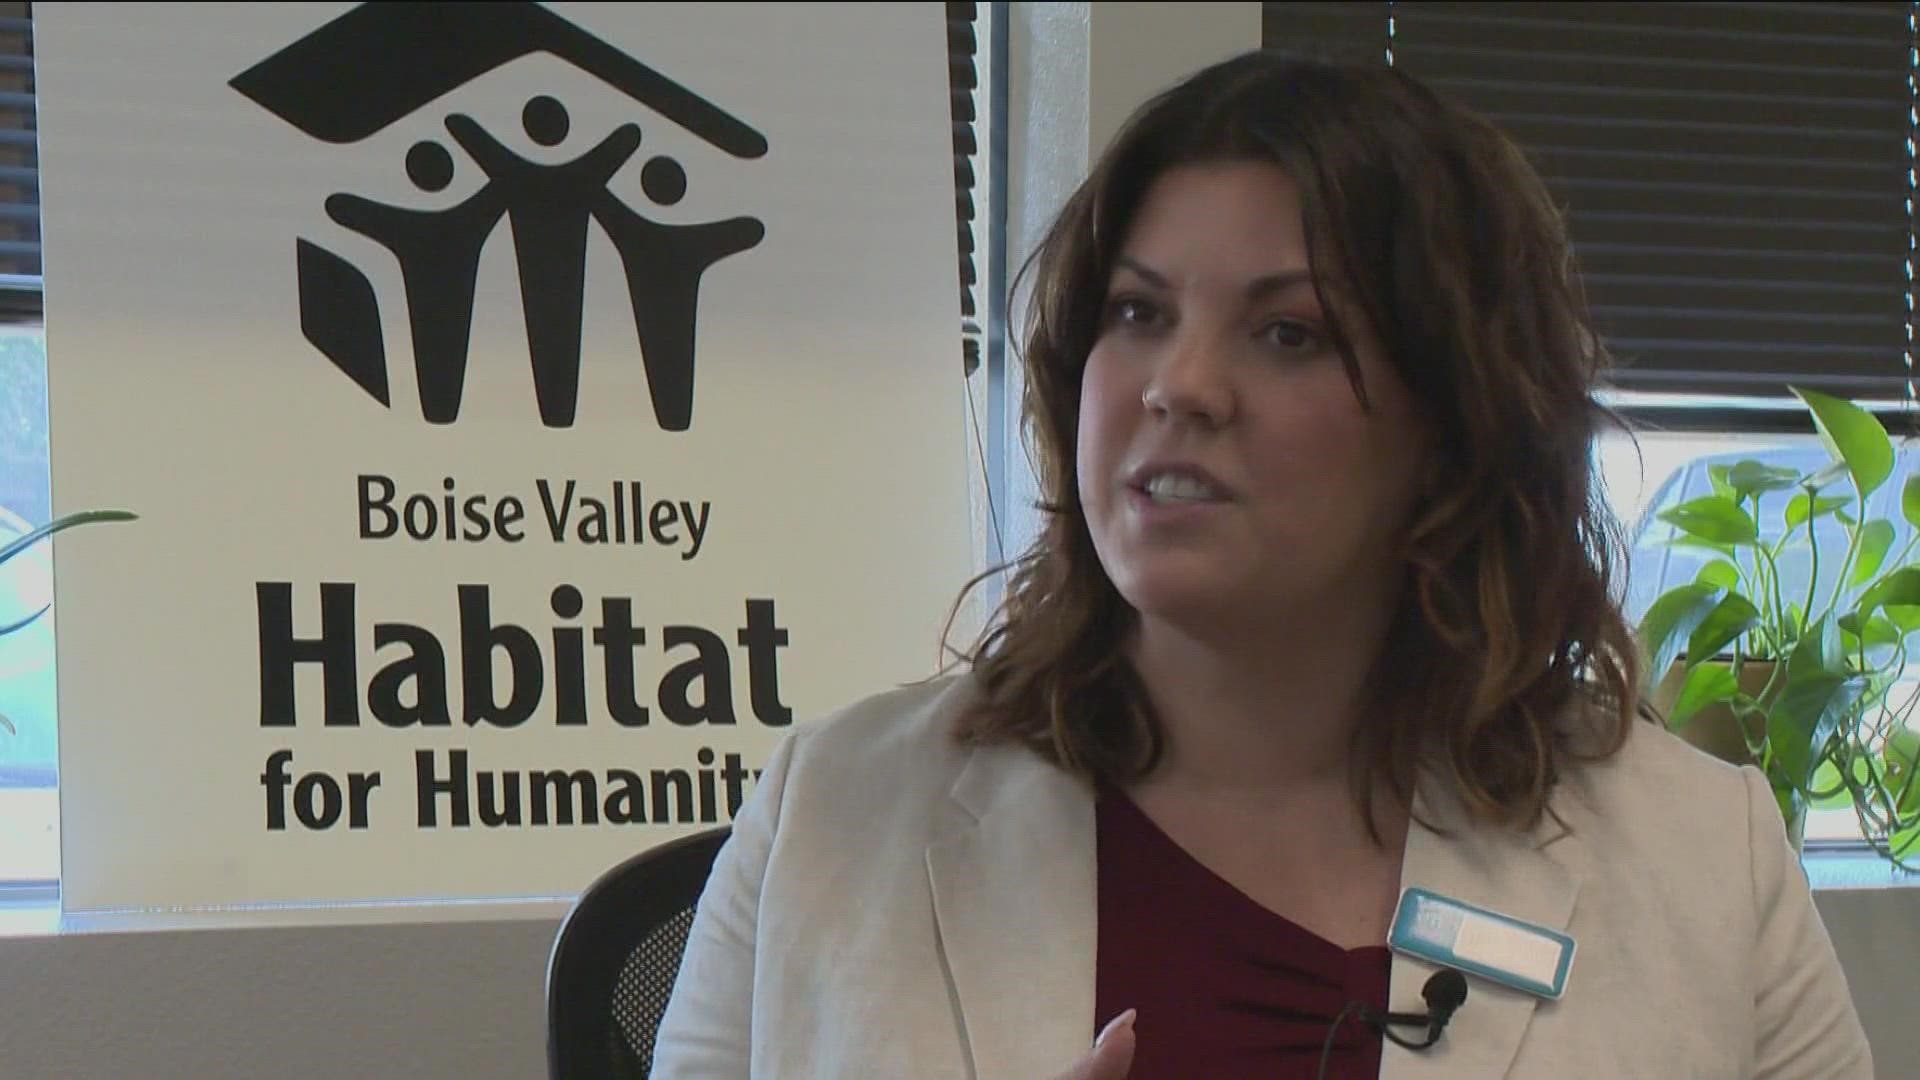 The Boise Valley Habitat for Humanity was previously housed in the basement of a church building; now that they have more room, their capacity to help has increased.